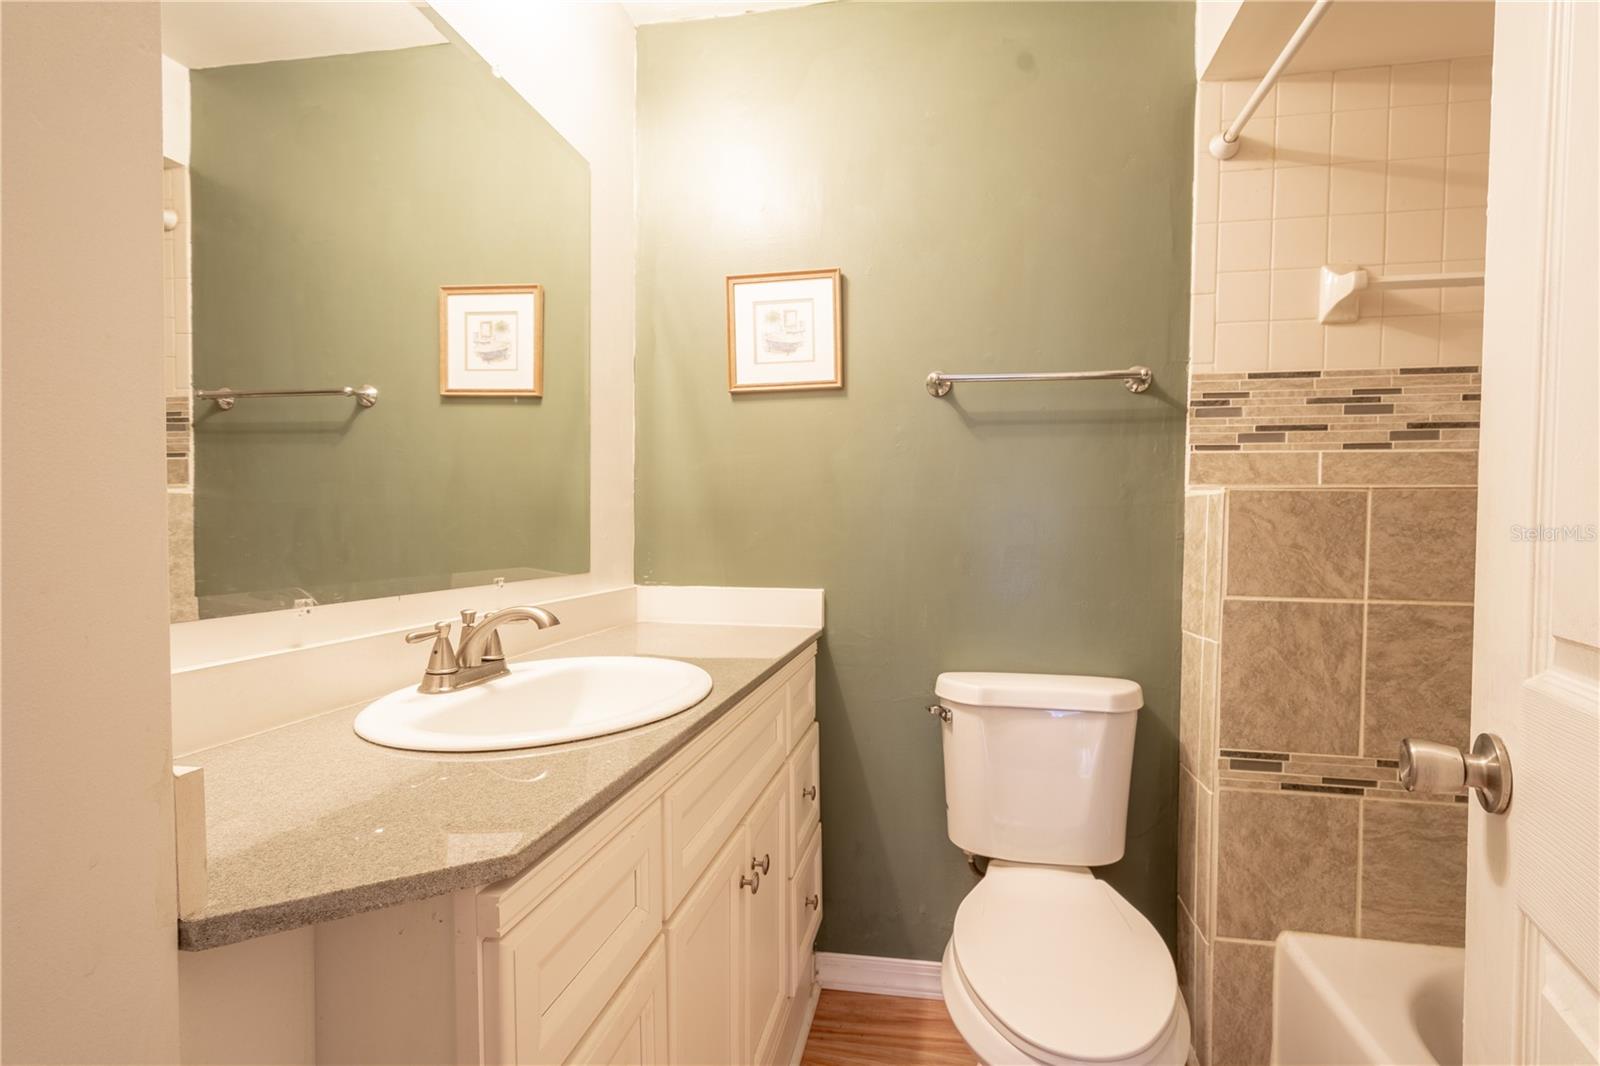 The bathroom features a tiled tub with a shower, a mirrored vanity with storage, and wood laminate flooring.